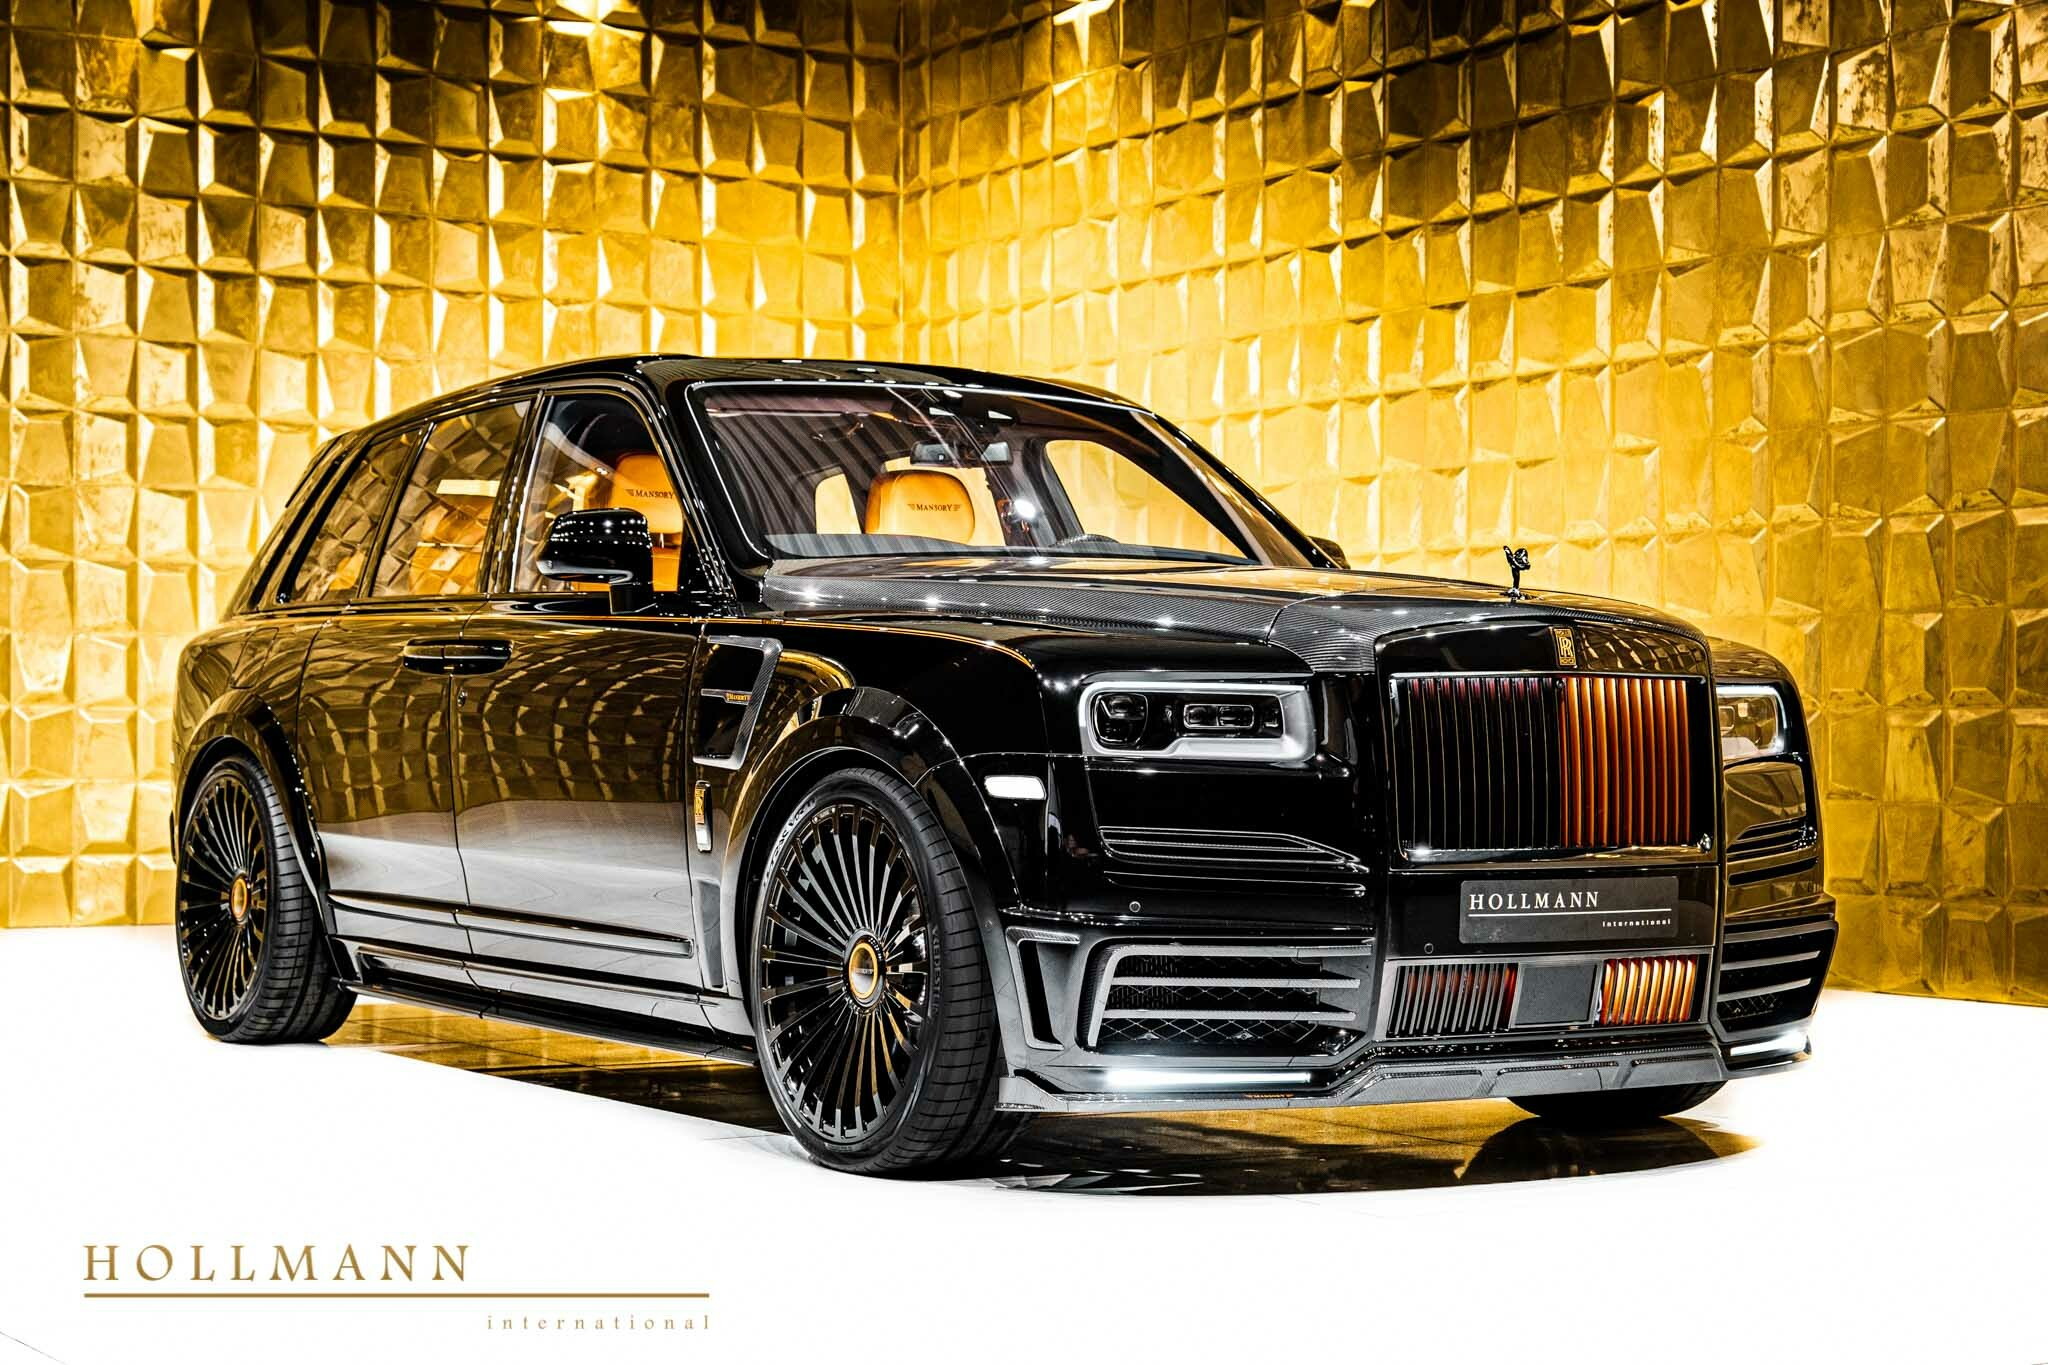 RollsRoyce Cullinan Black Badge by Mansory Is Awesome, Save for One